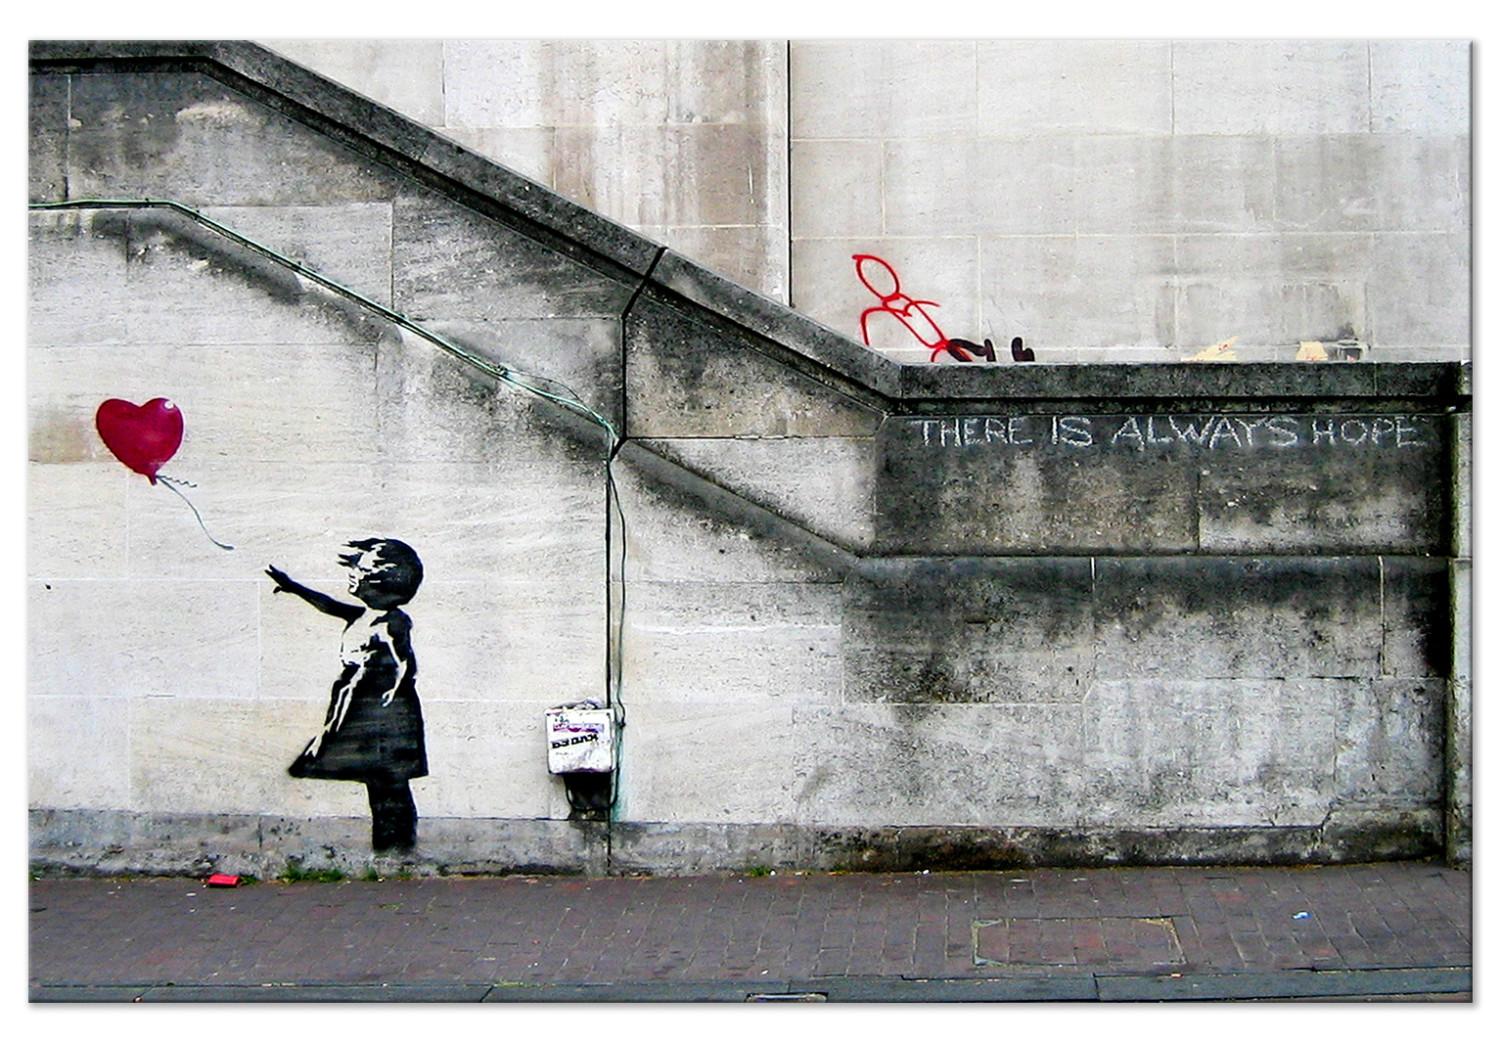 Large Canvas Girl With a Balloon by Banksy [Large Format]